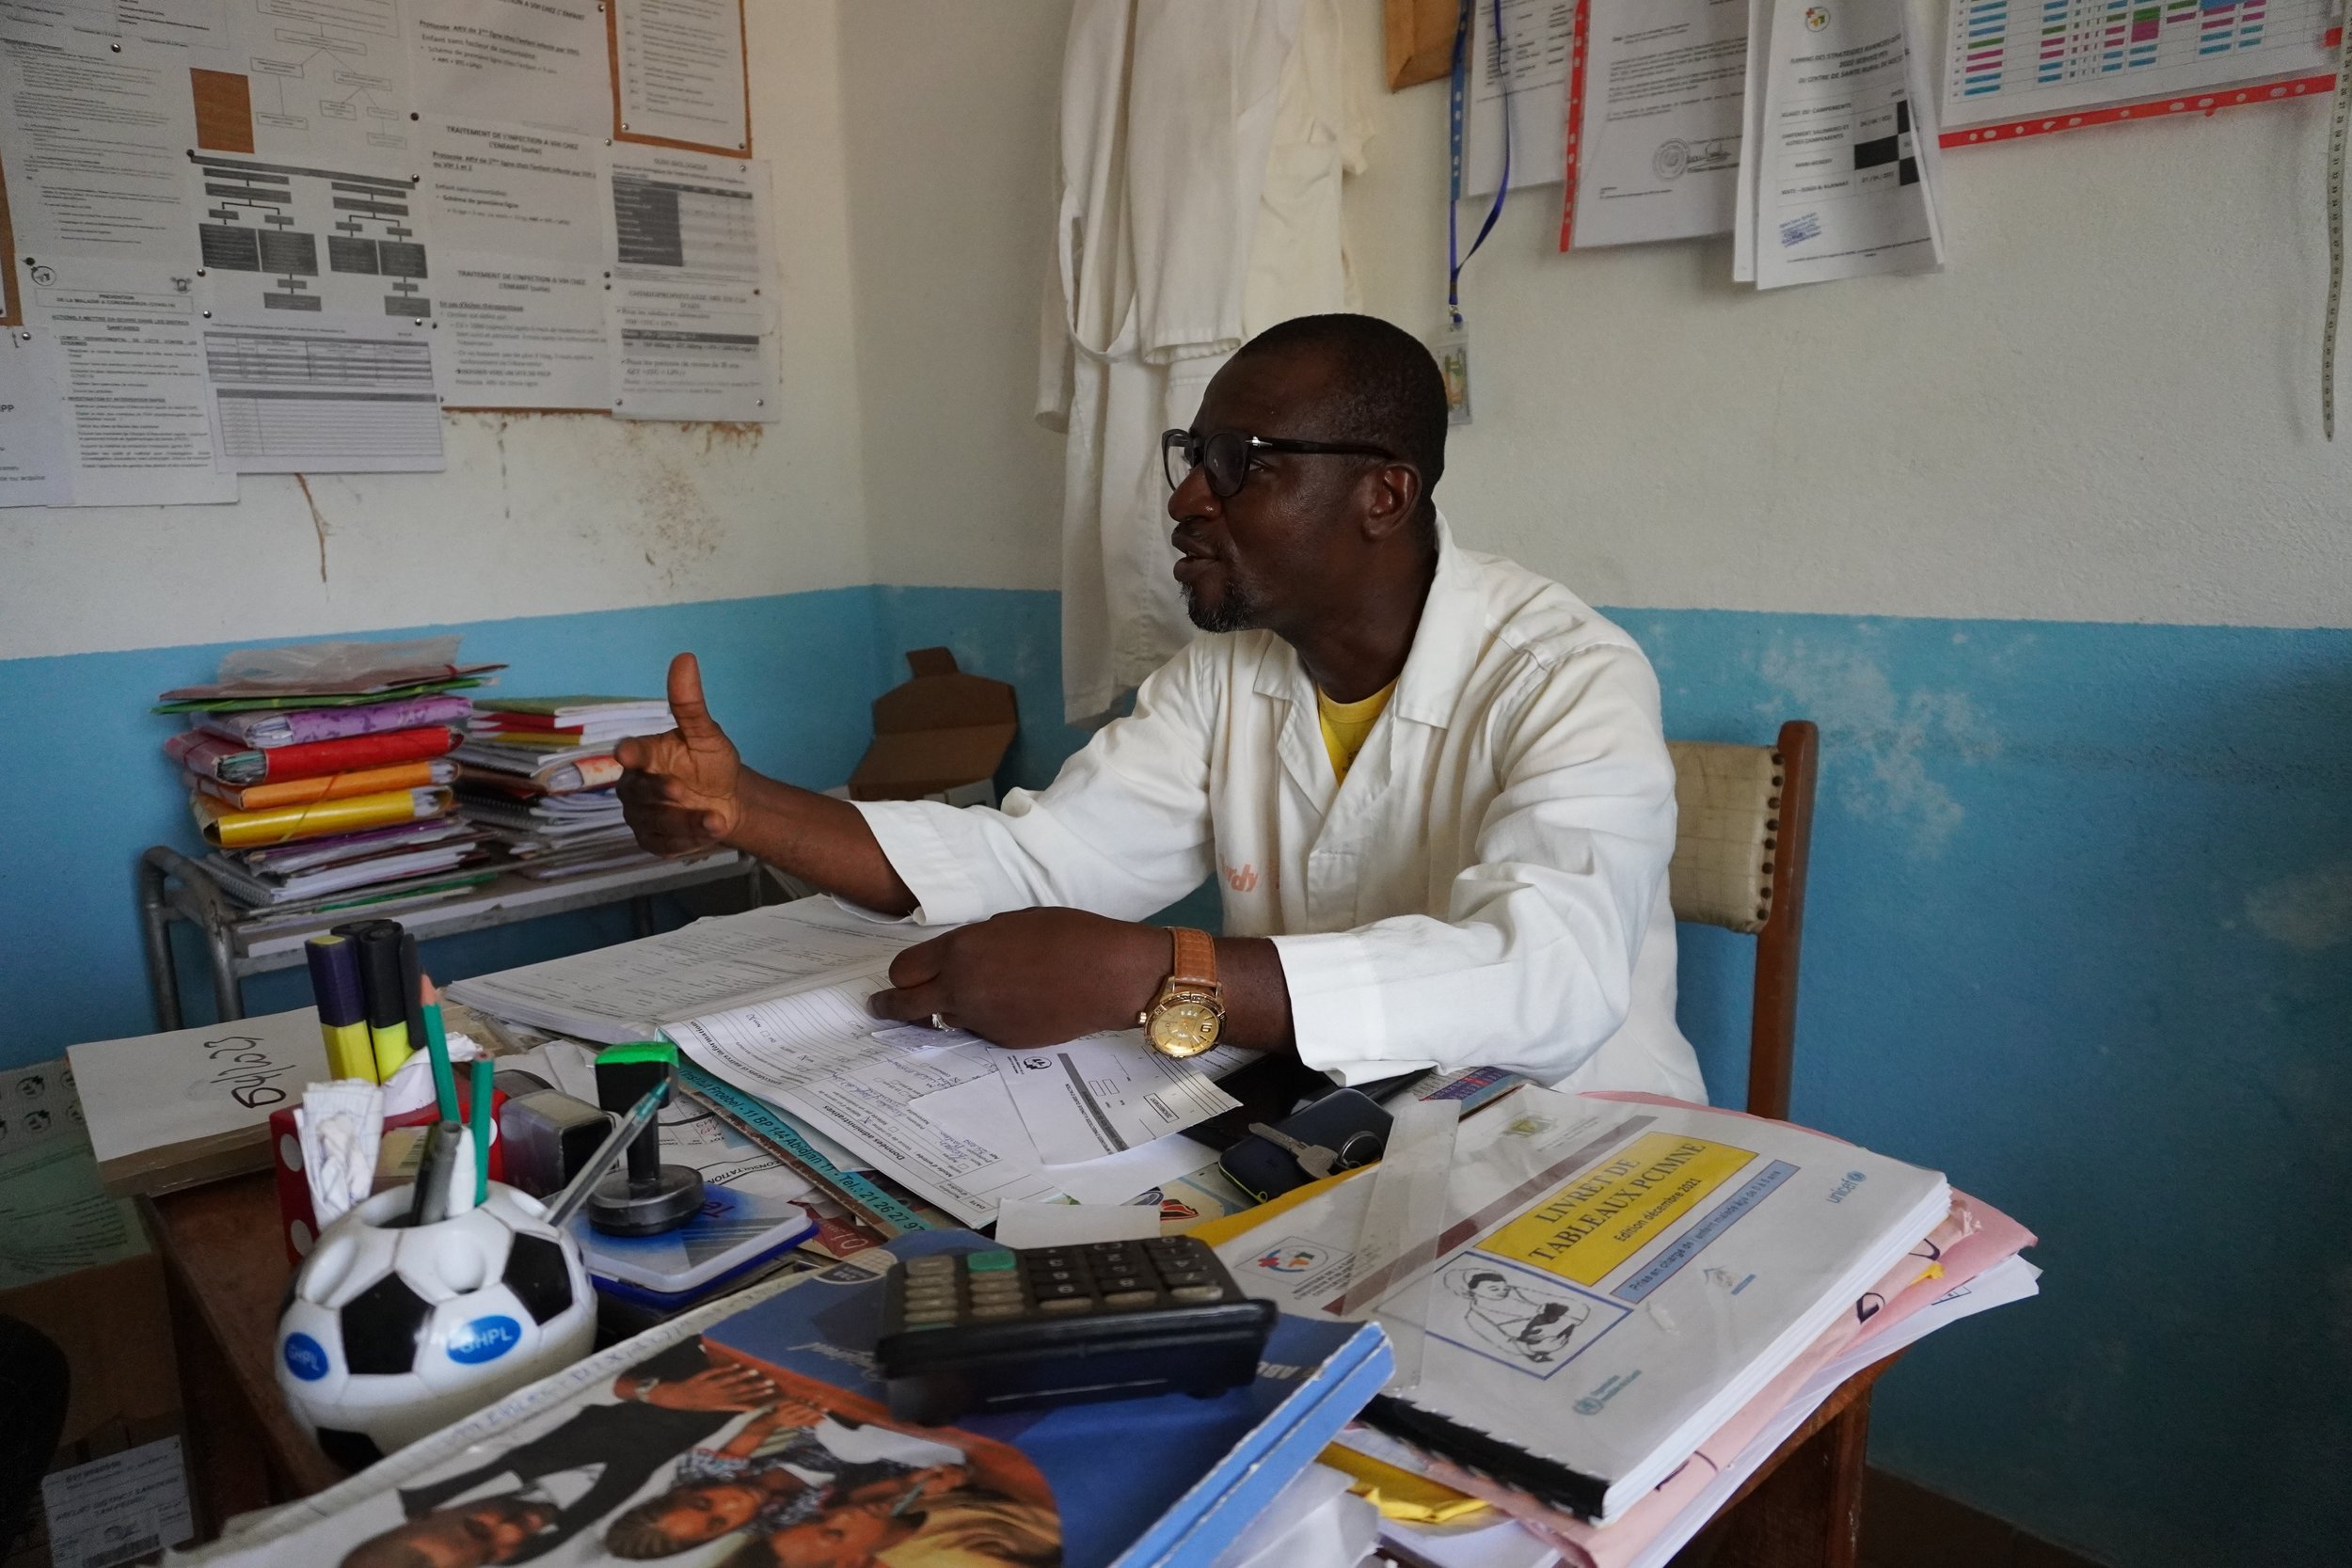  Marc Ane Etilè, a nurse, is affectionately called "doctor" by the people of Roc. He explains that he focuses on prevention, to avoid having to refer patients to the hospital in San Pedro. 